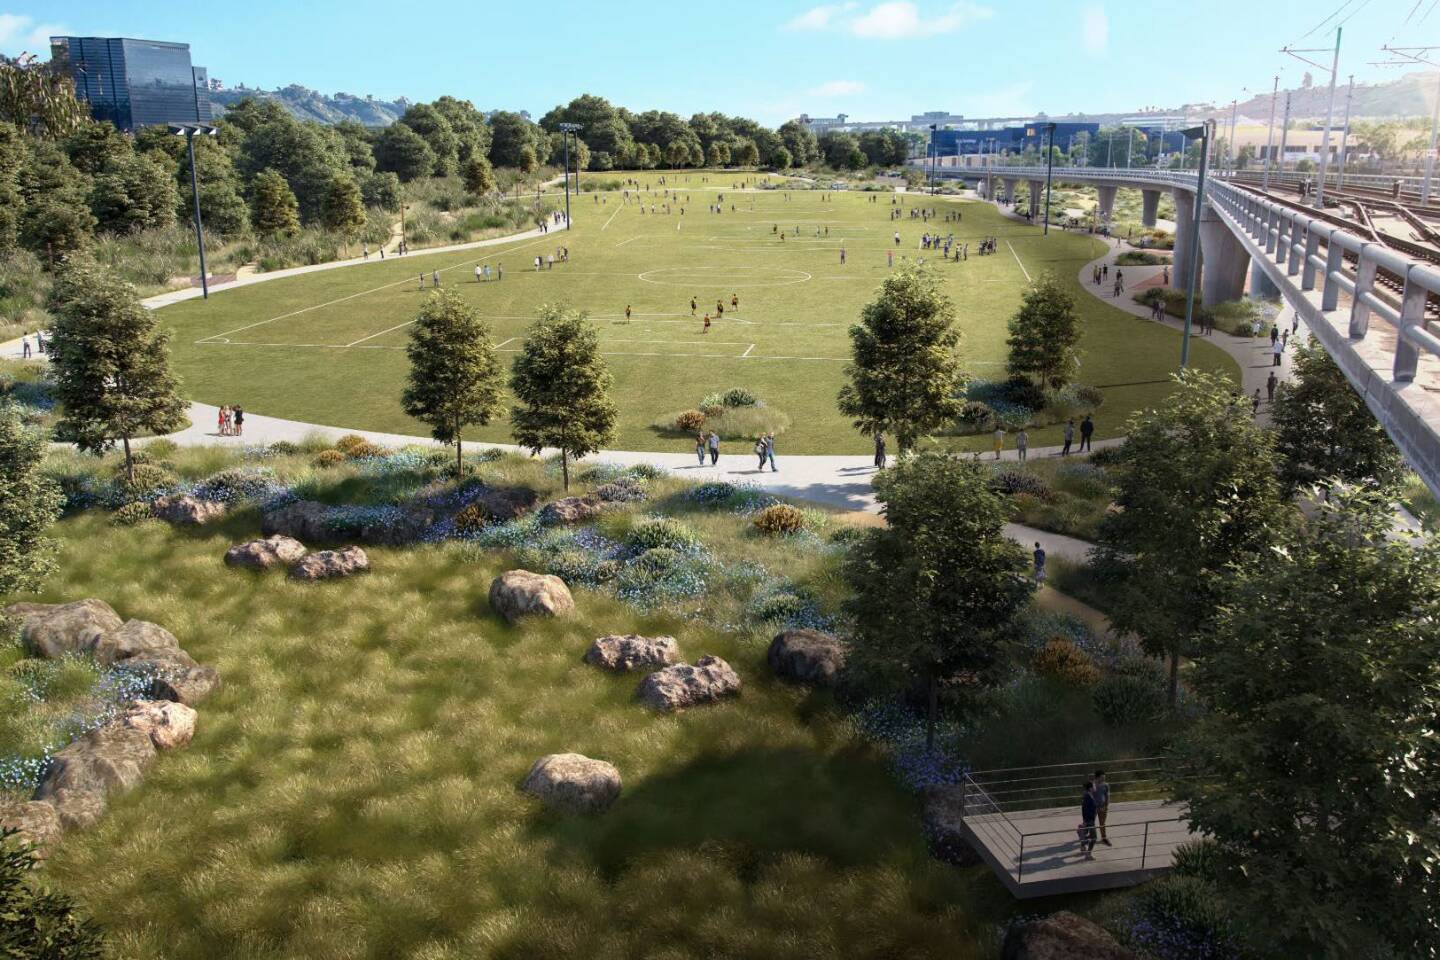 In the foreground of the rendering is a water quality basin with an overlook platform. Stormwater from the site will flow to this location and a few others and will be treated before it enters the river.